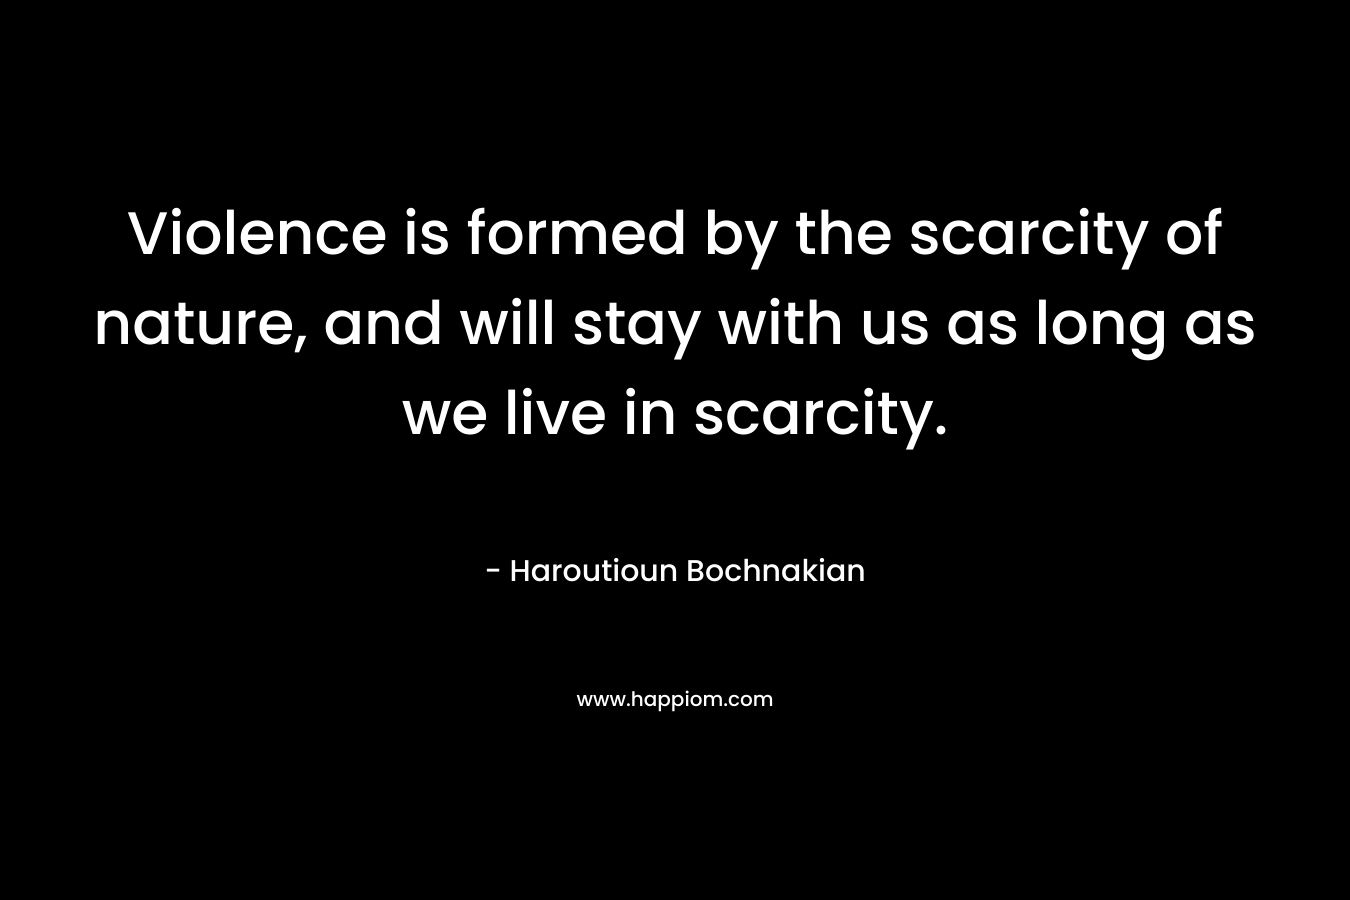 Violence is formed by the scarcity of nature, and will stay with us as long as we live in scarcity. – Haroutioun Bochnakian